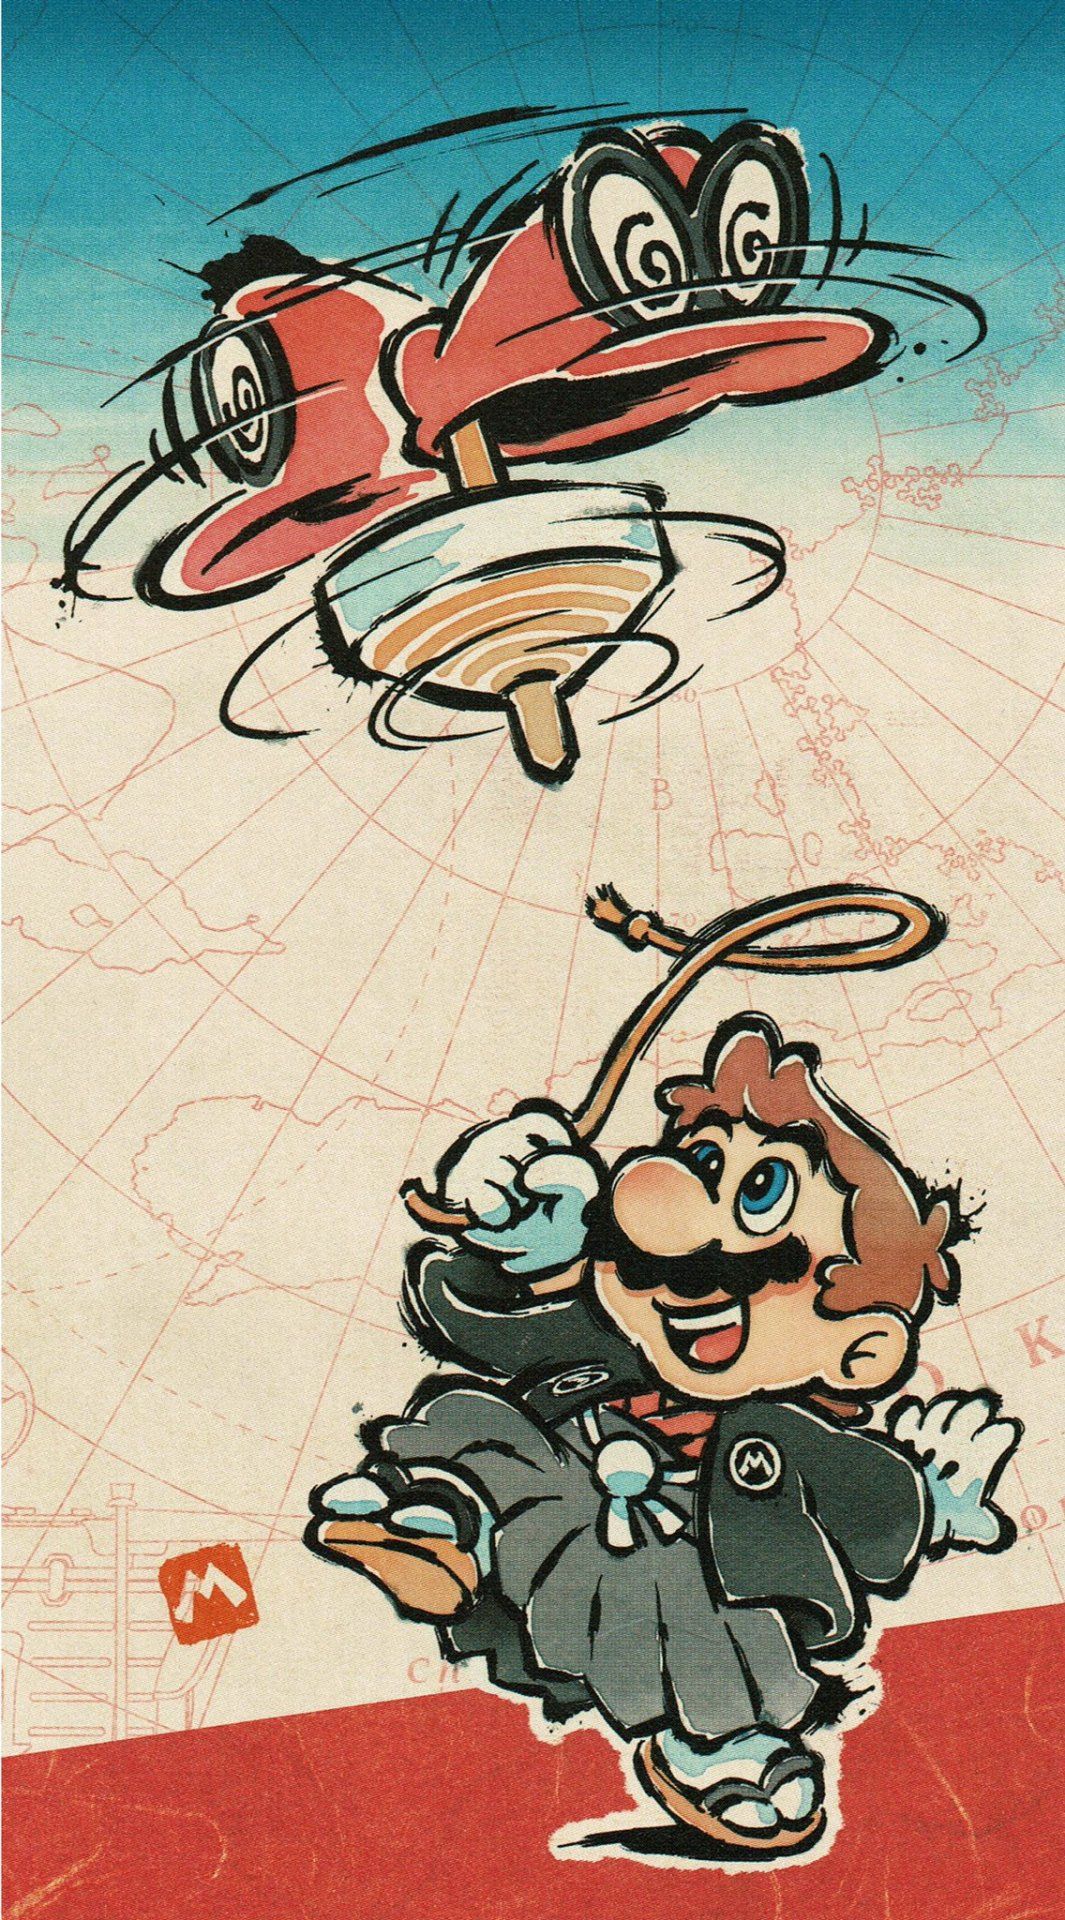 A painting of Mario and a red car flying through the air. - Nintendo